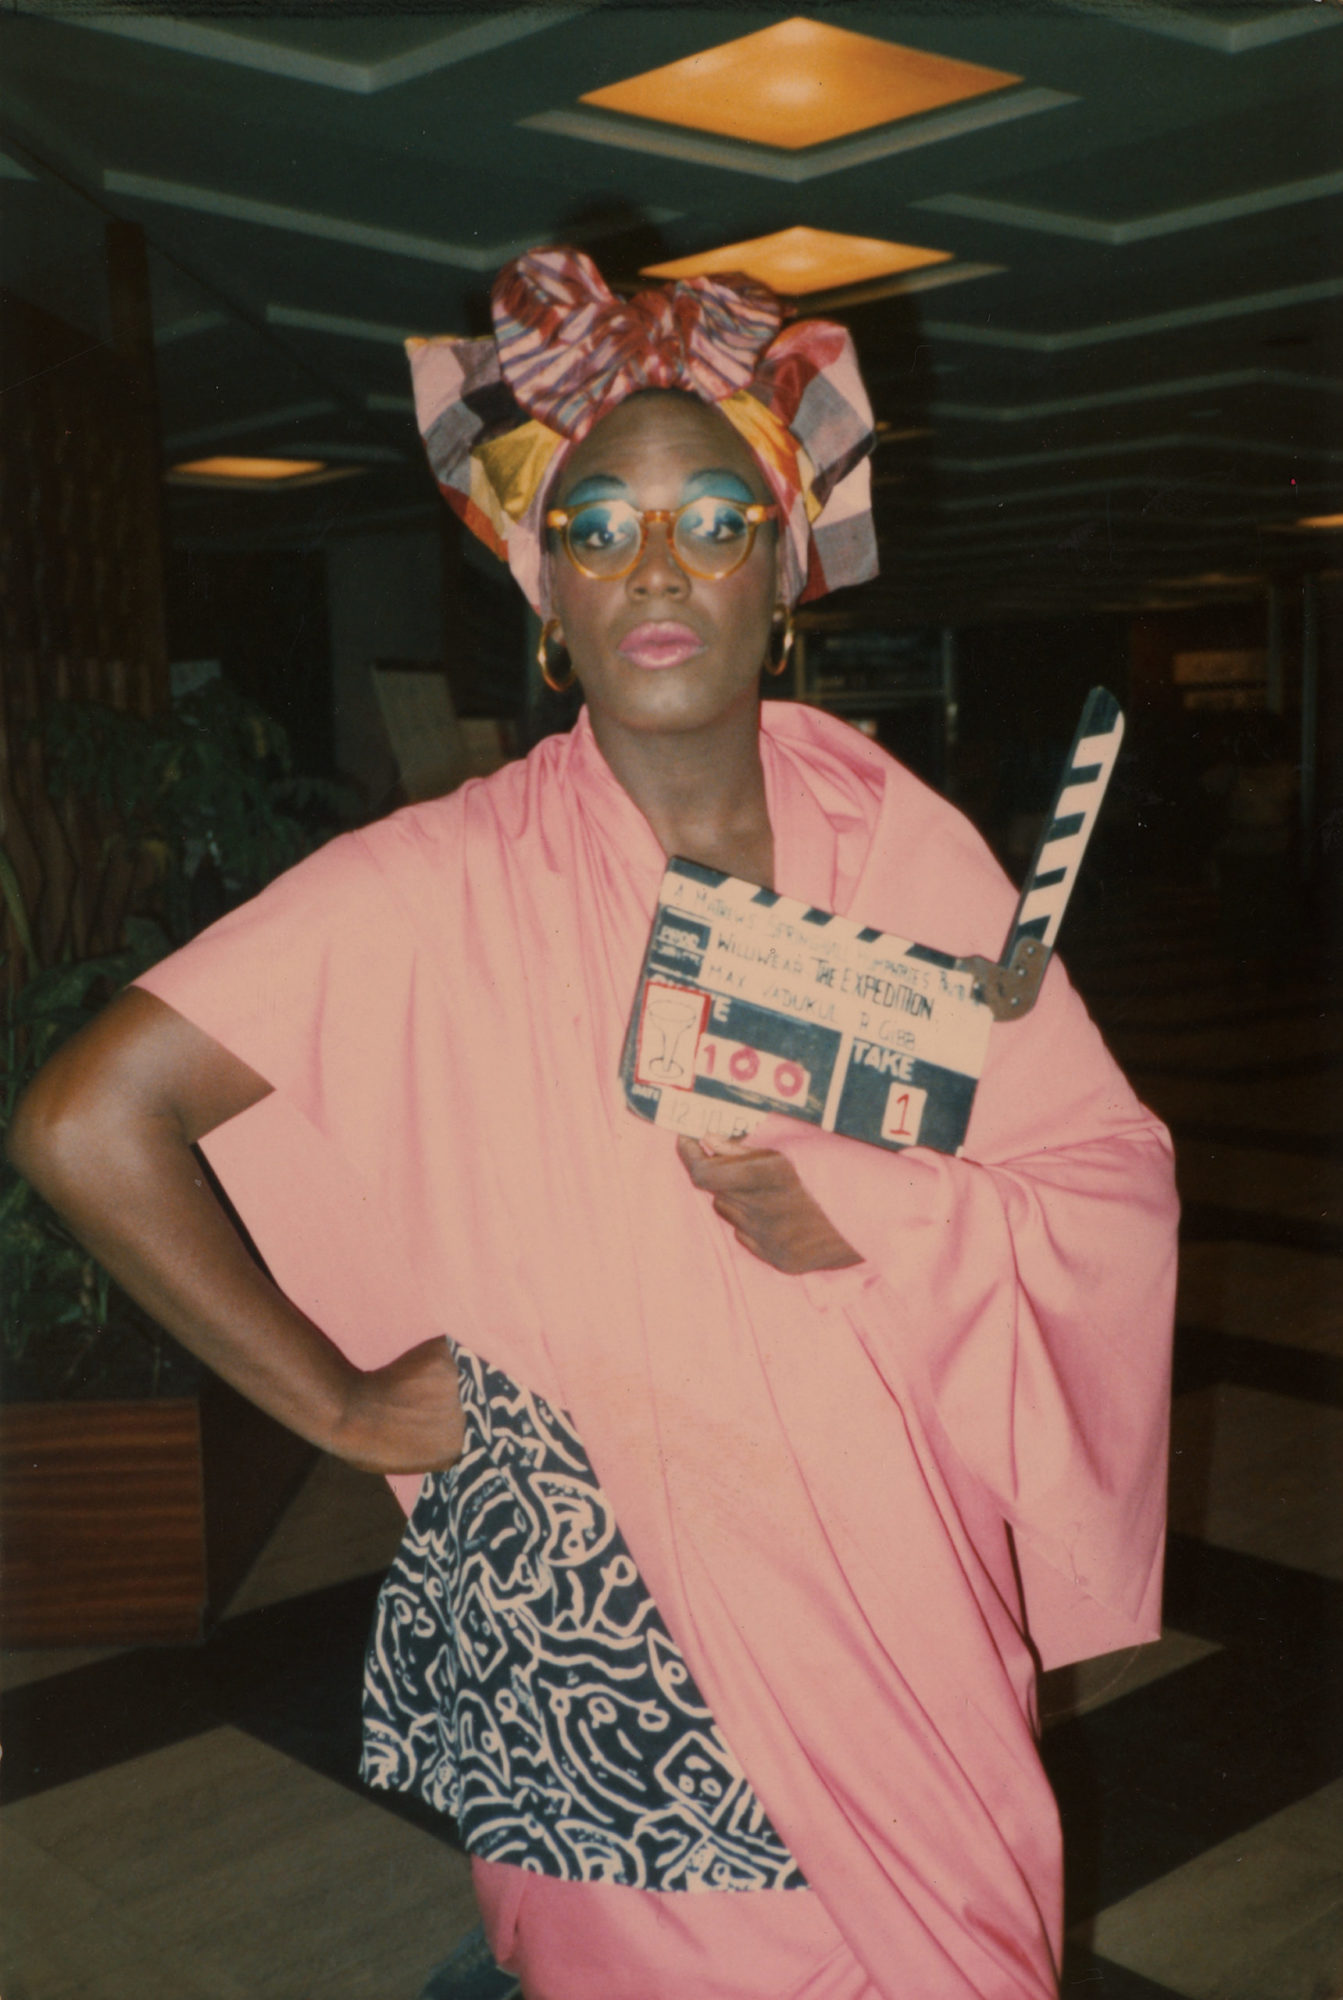 Photograph of a bespectacled dark-skinned Black man, Willi Smith, dressed in a pink and black women's ensemble, wearing colorful makeup, a headwrap, and holding a film slate